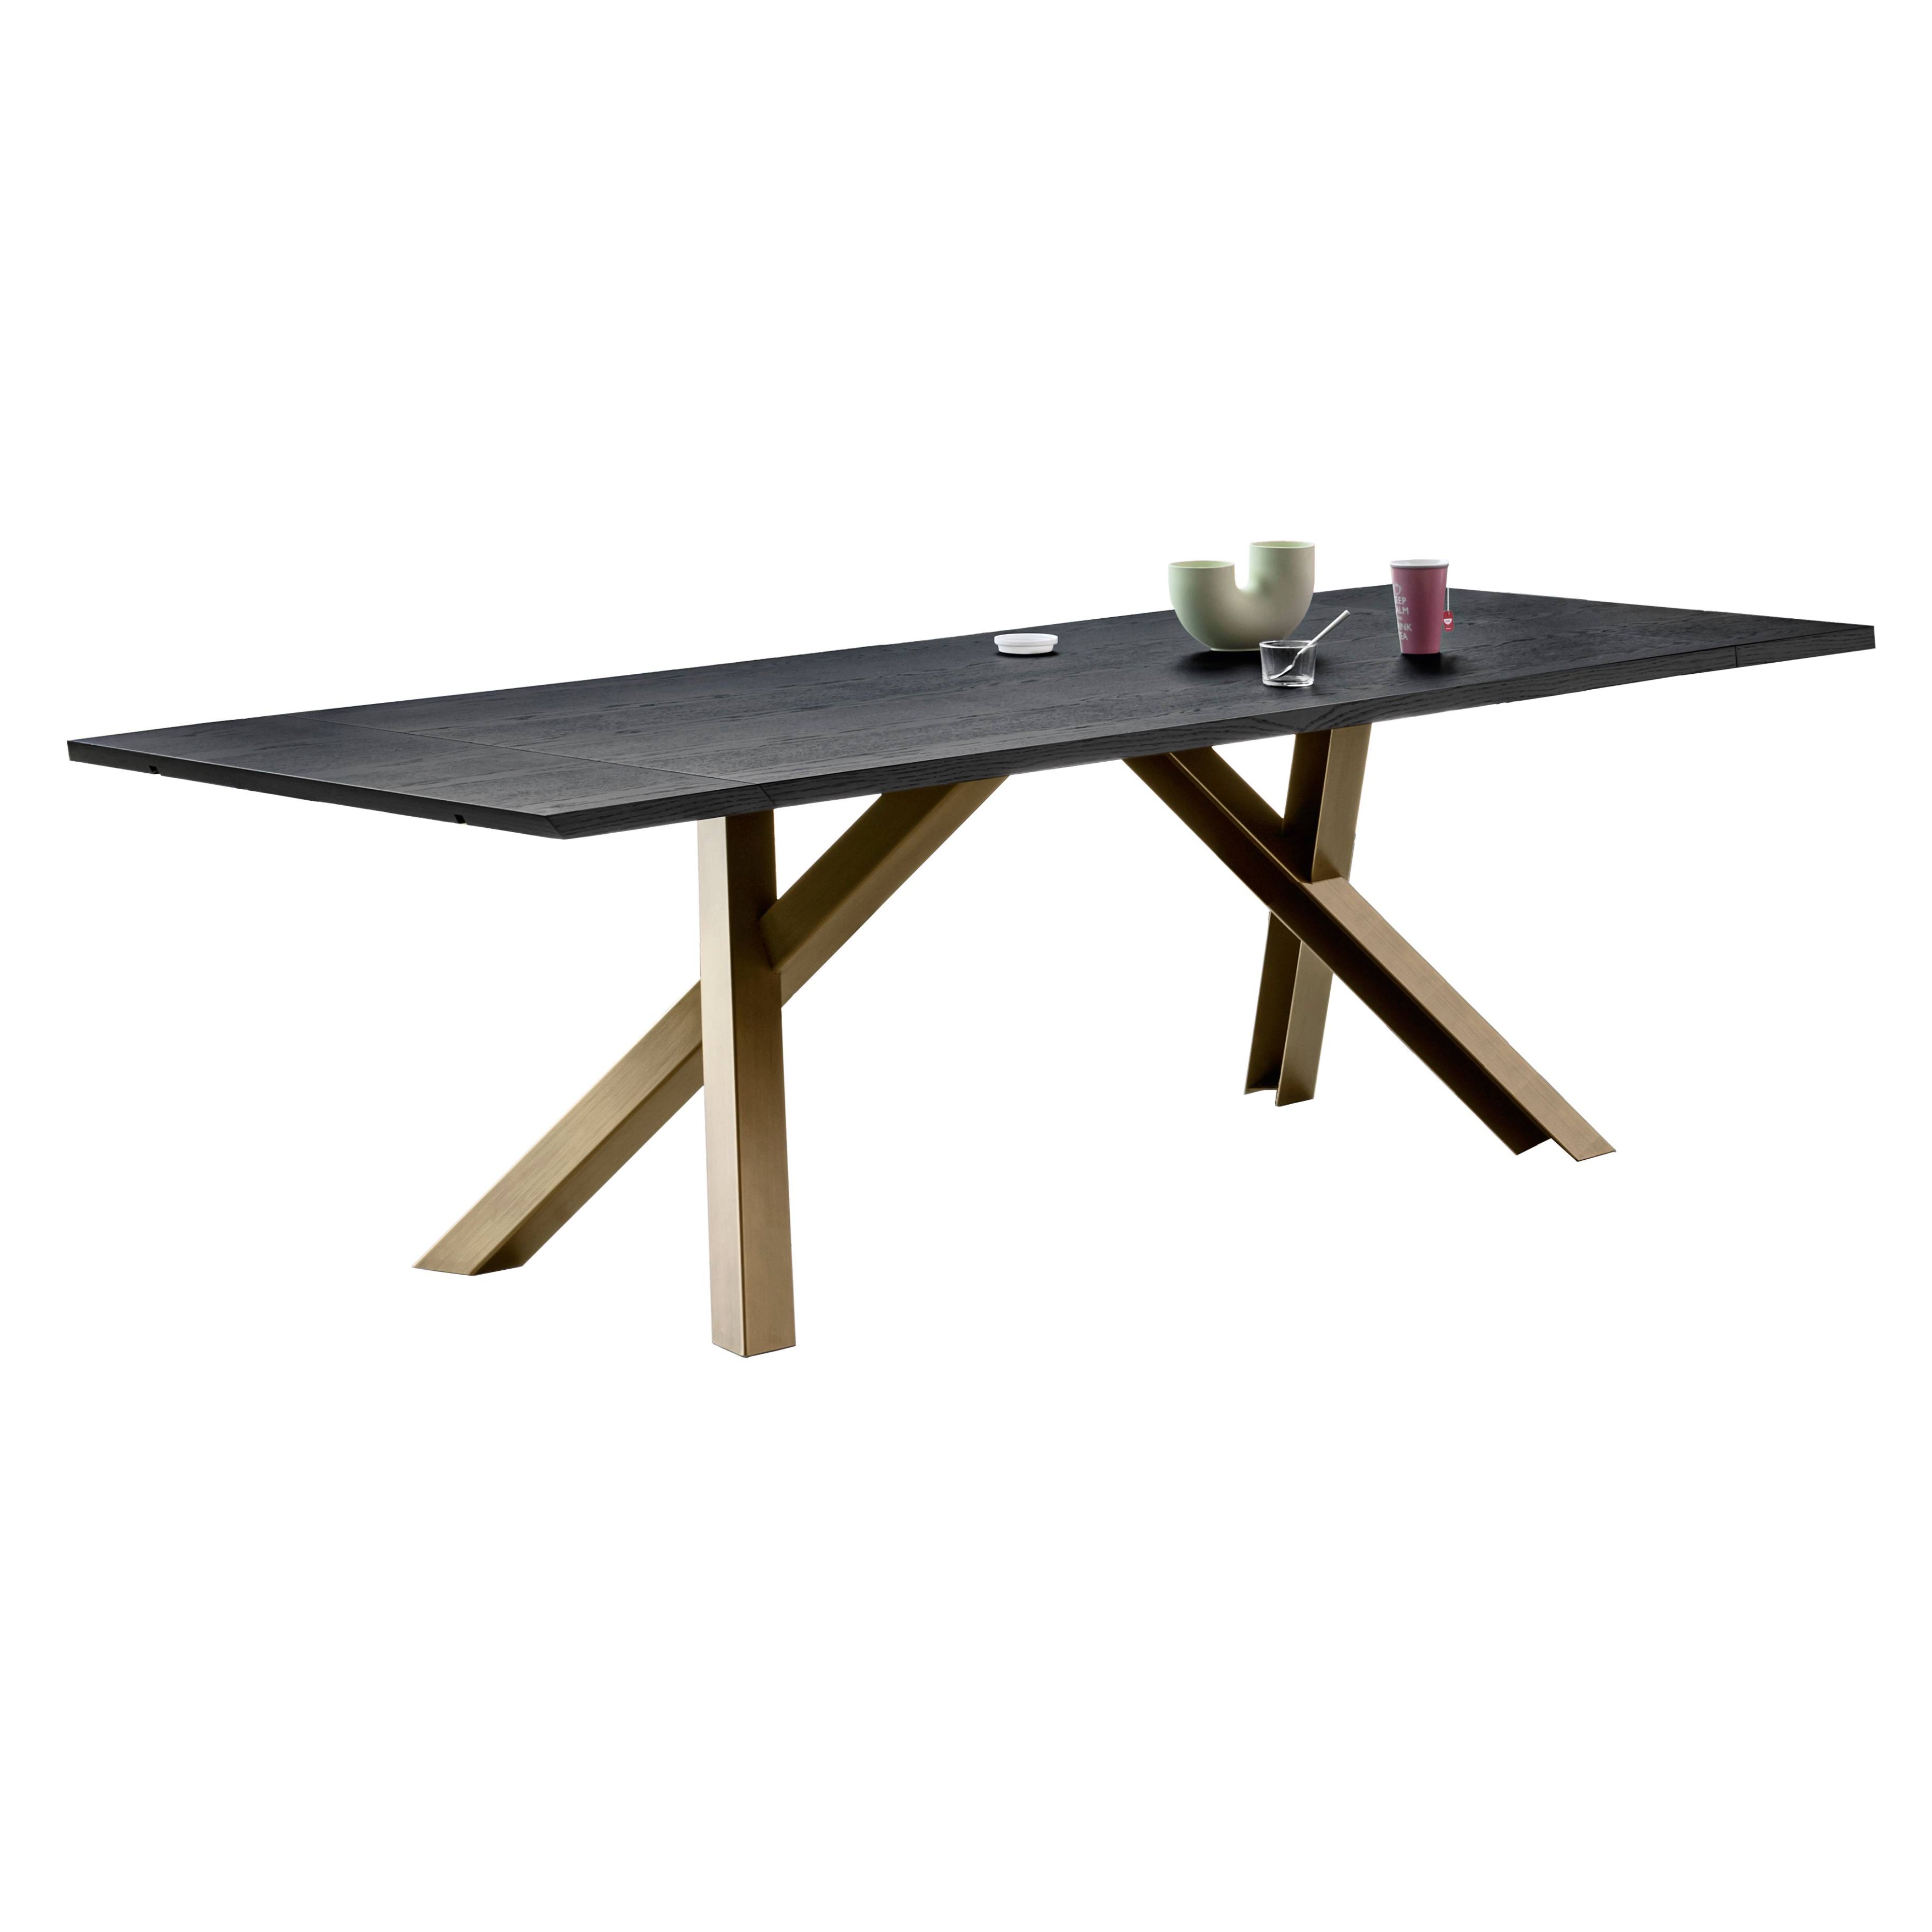 Gustave Plus Dining Table: Large - 78.7